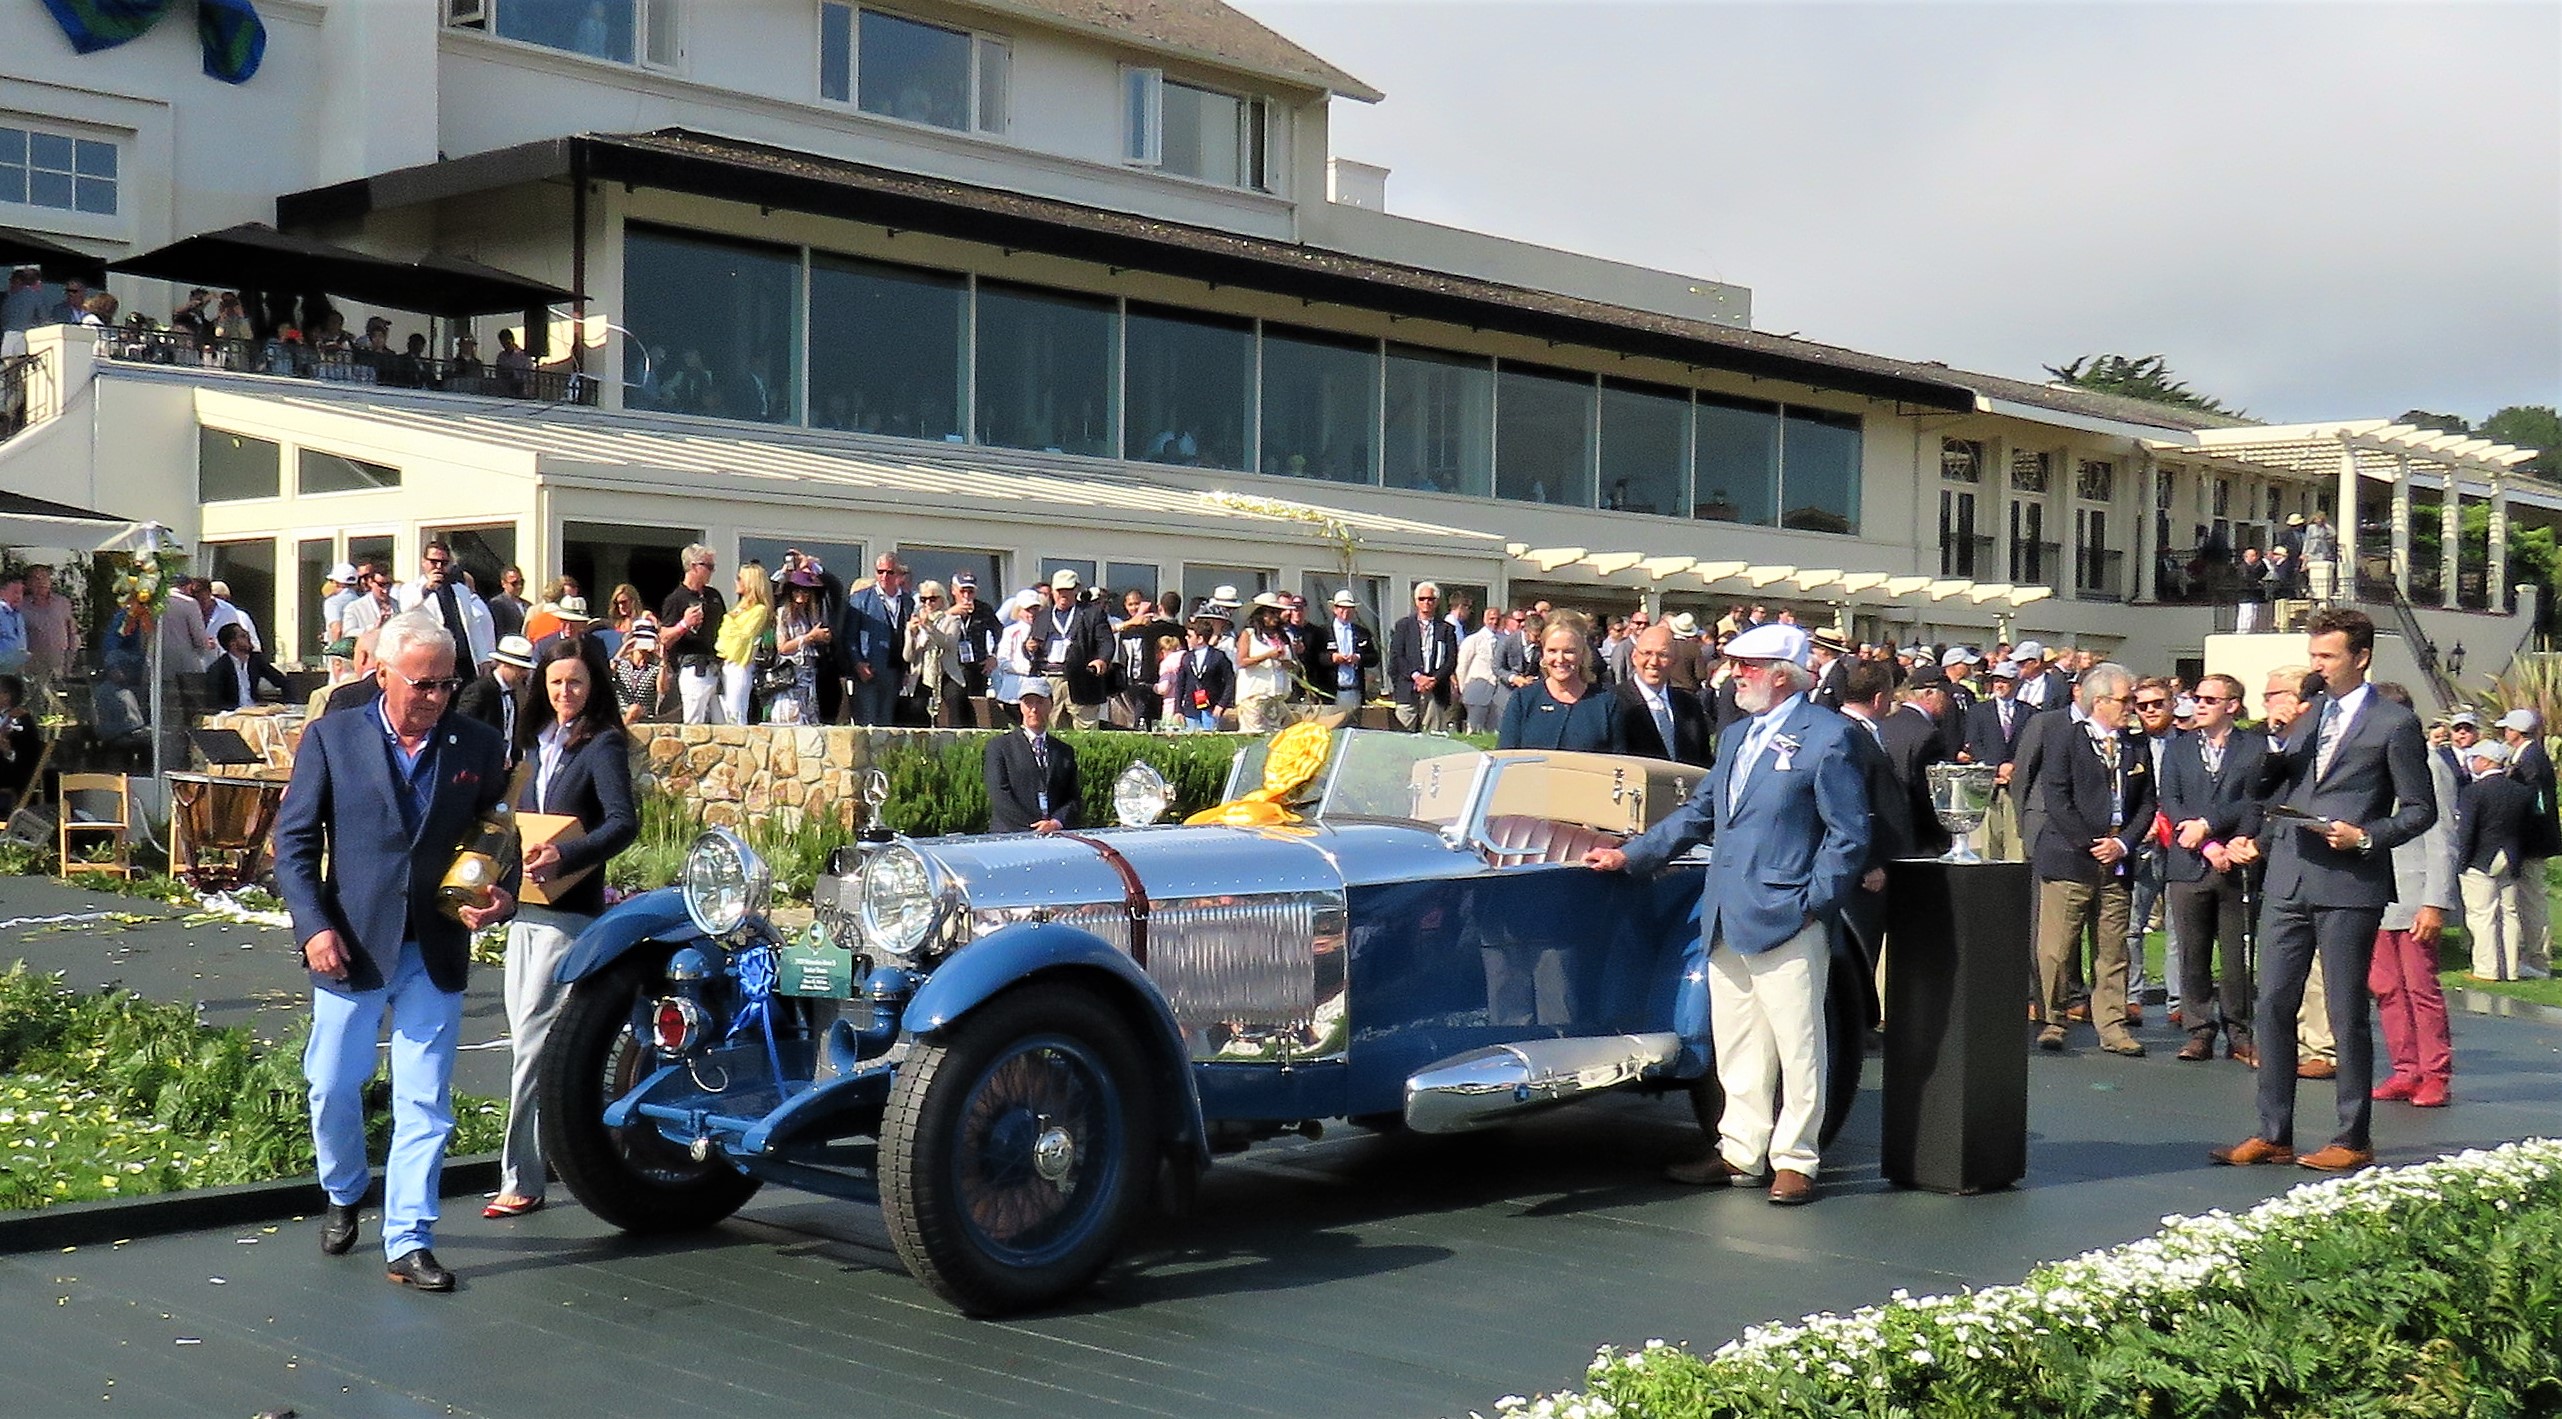 , Feasting at the Pebble Beach Concours, ClassicCars.com Journal